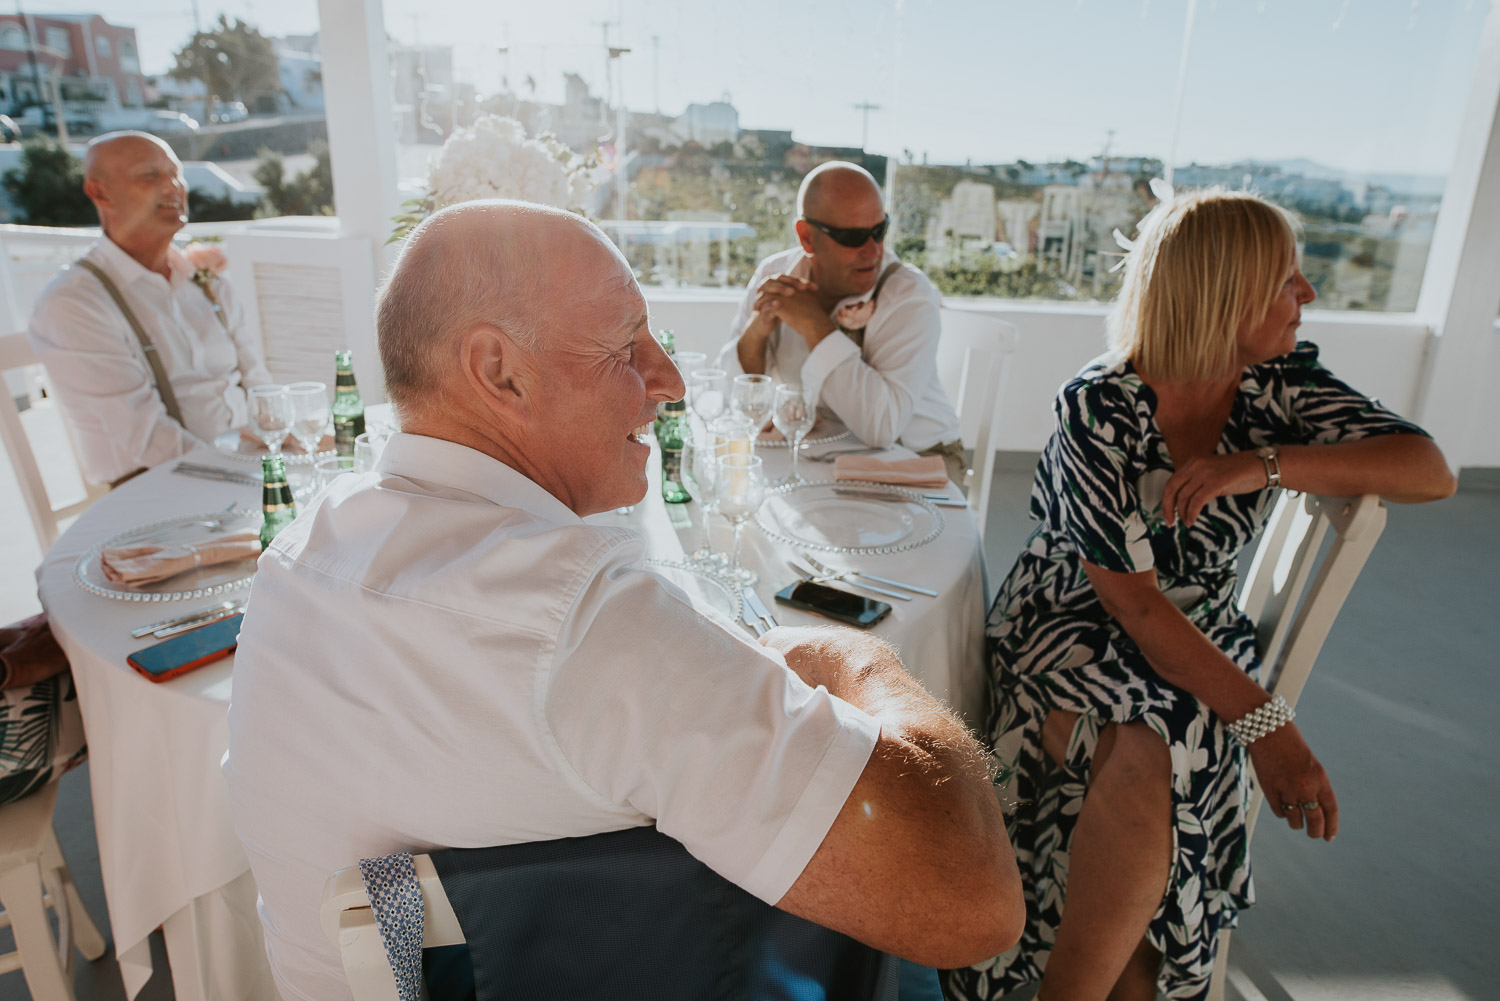 Wedding photographer Santorini: guests sat at their table basked in the sun smiling as they listen to the speeches by Ben and Vesna.